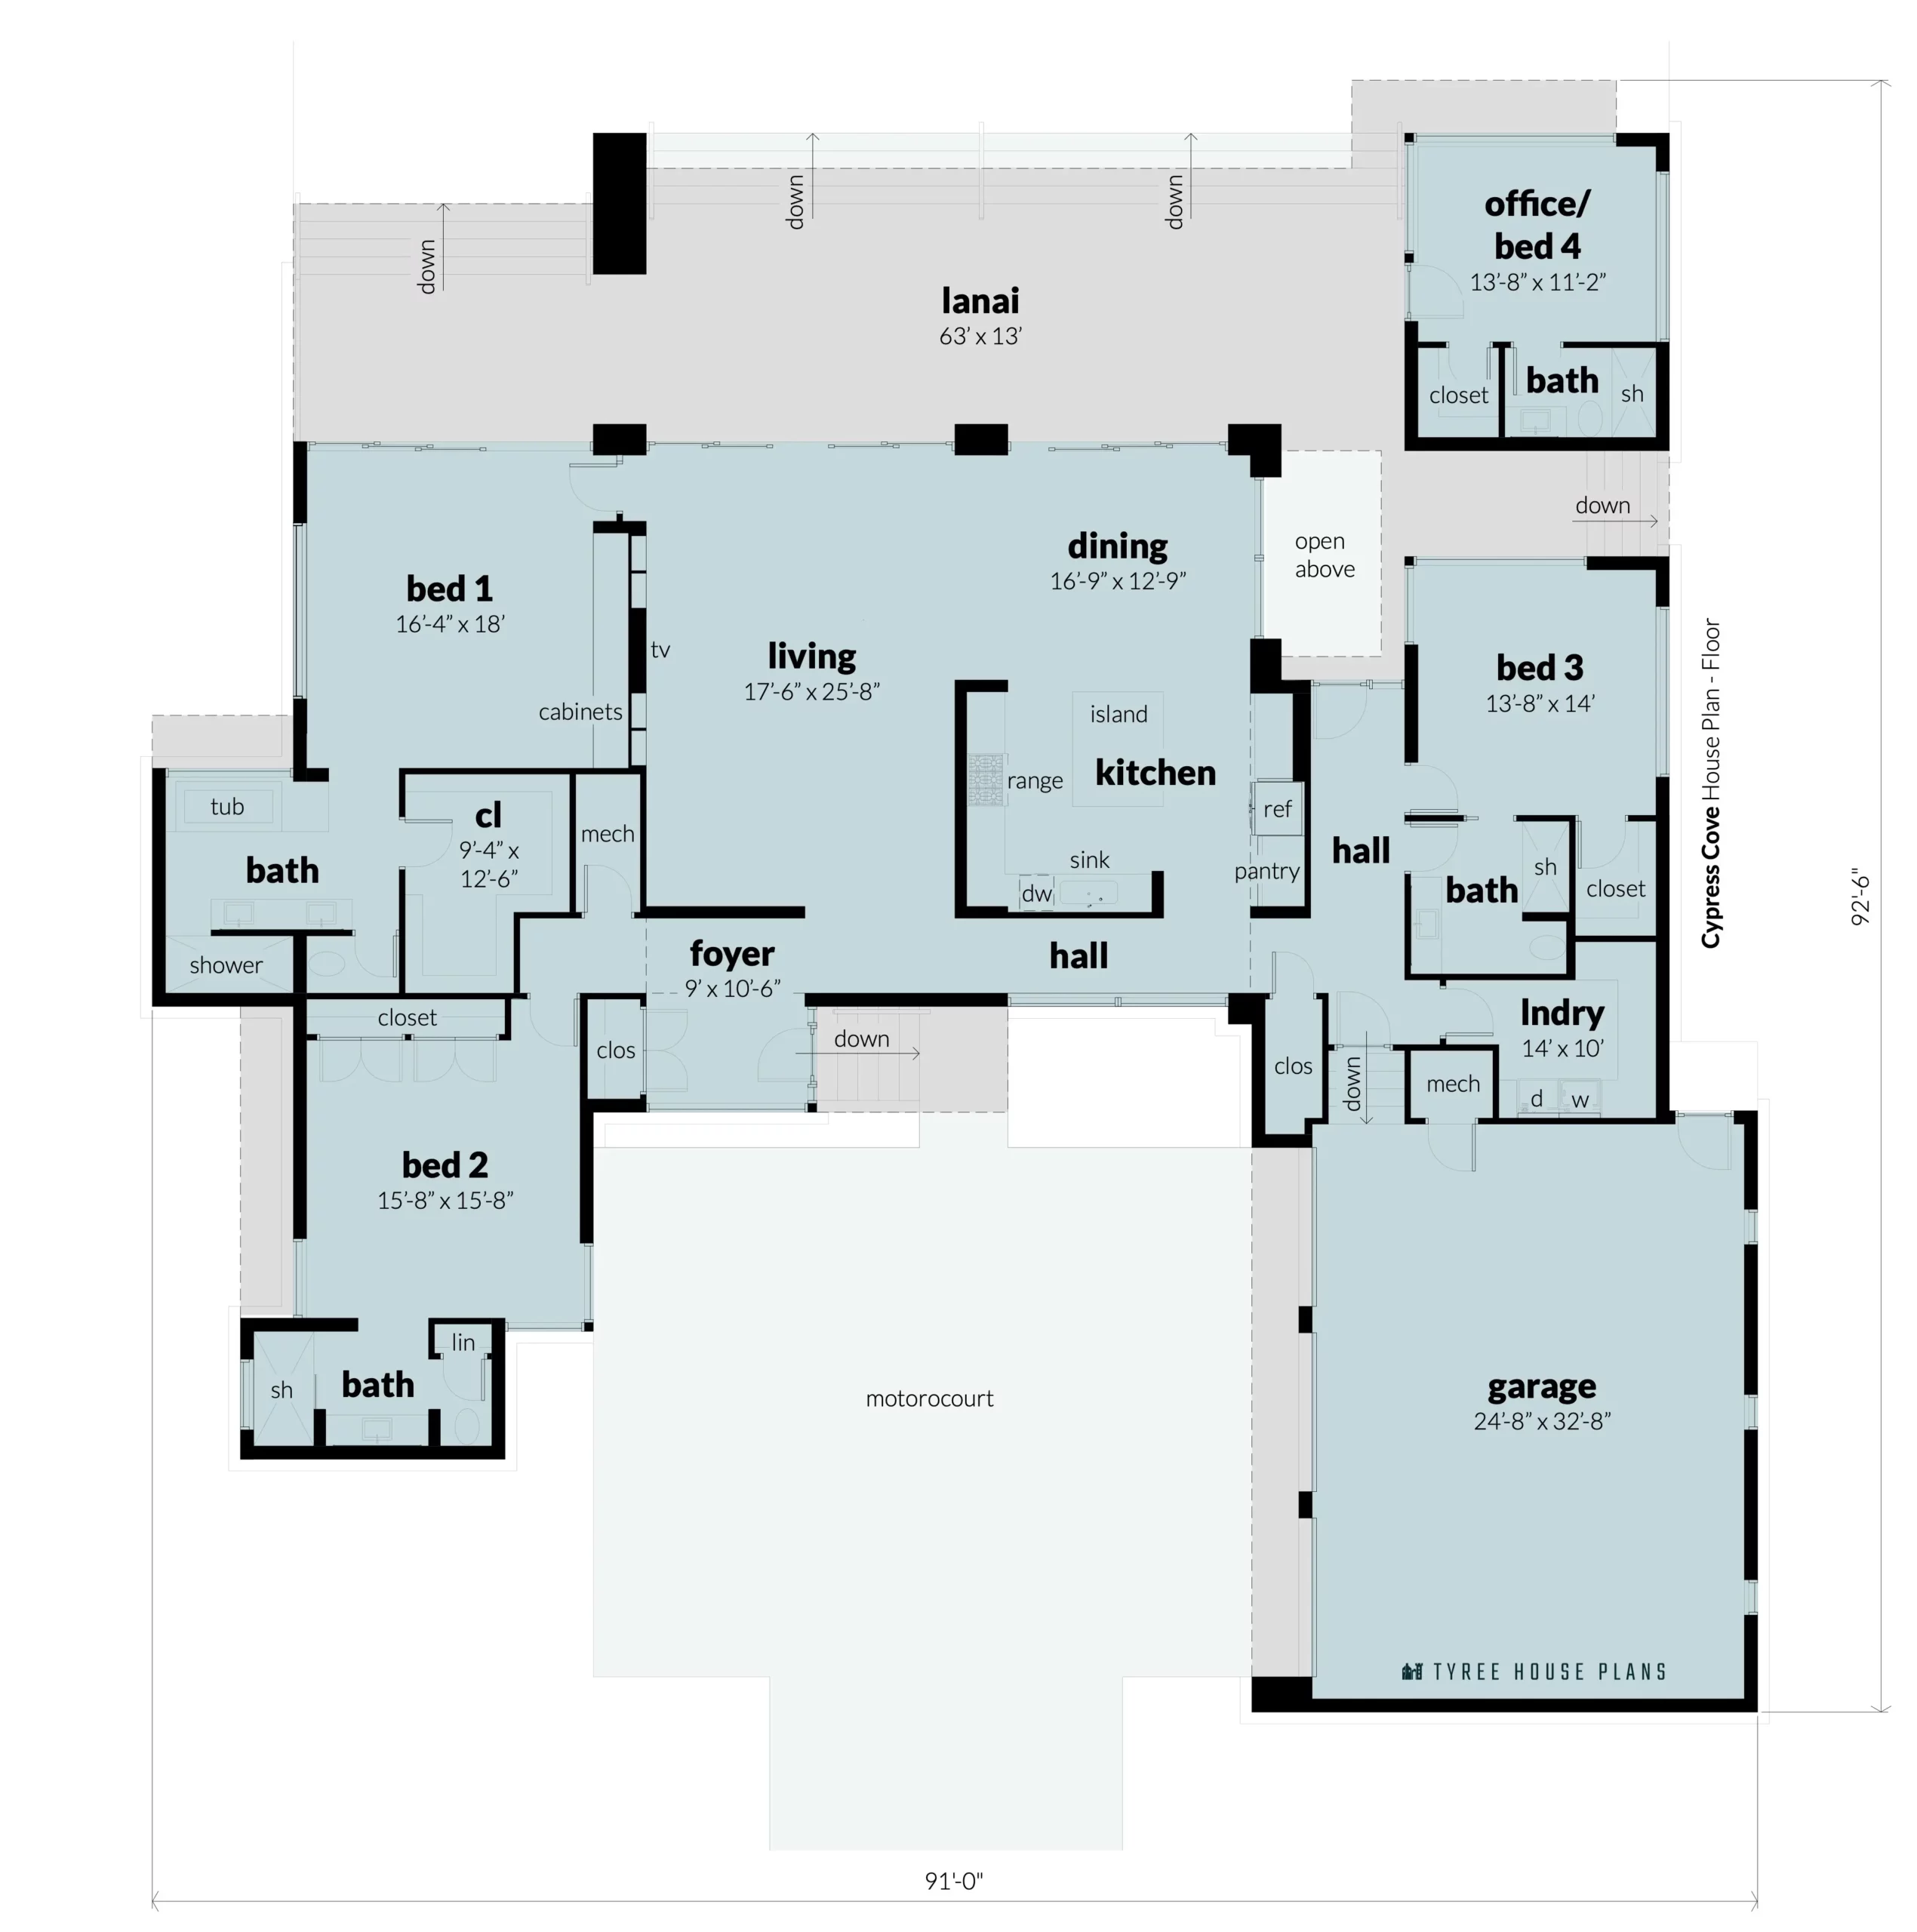 Floor plan. Cypress Cove by Tyree House Plans.